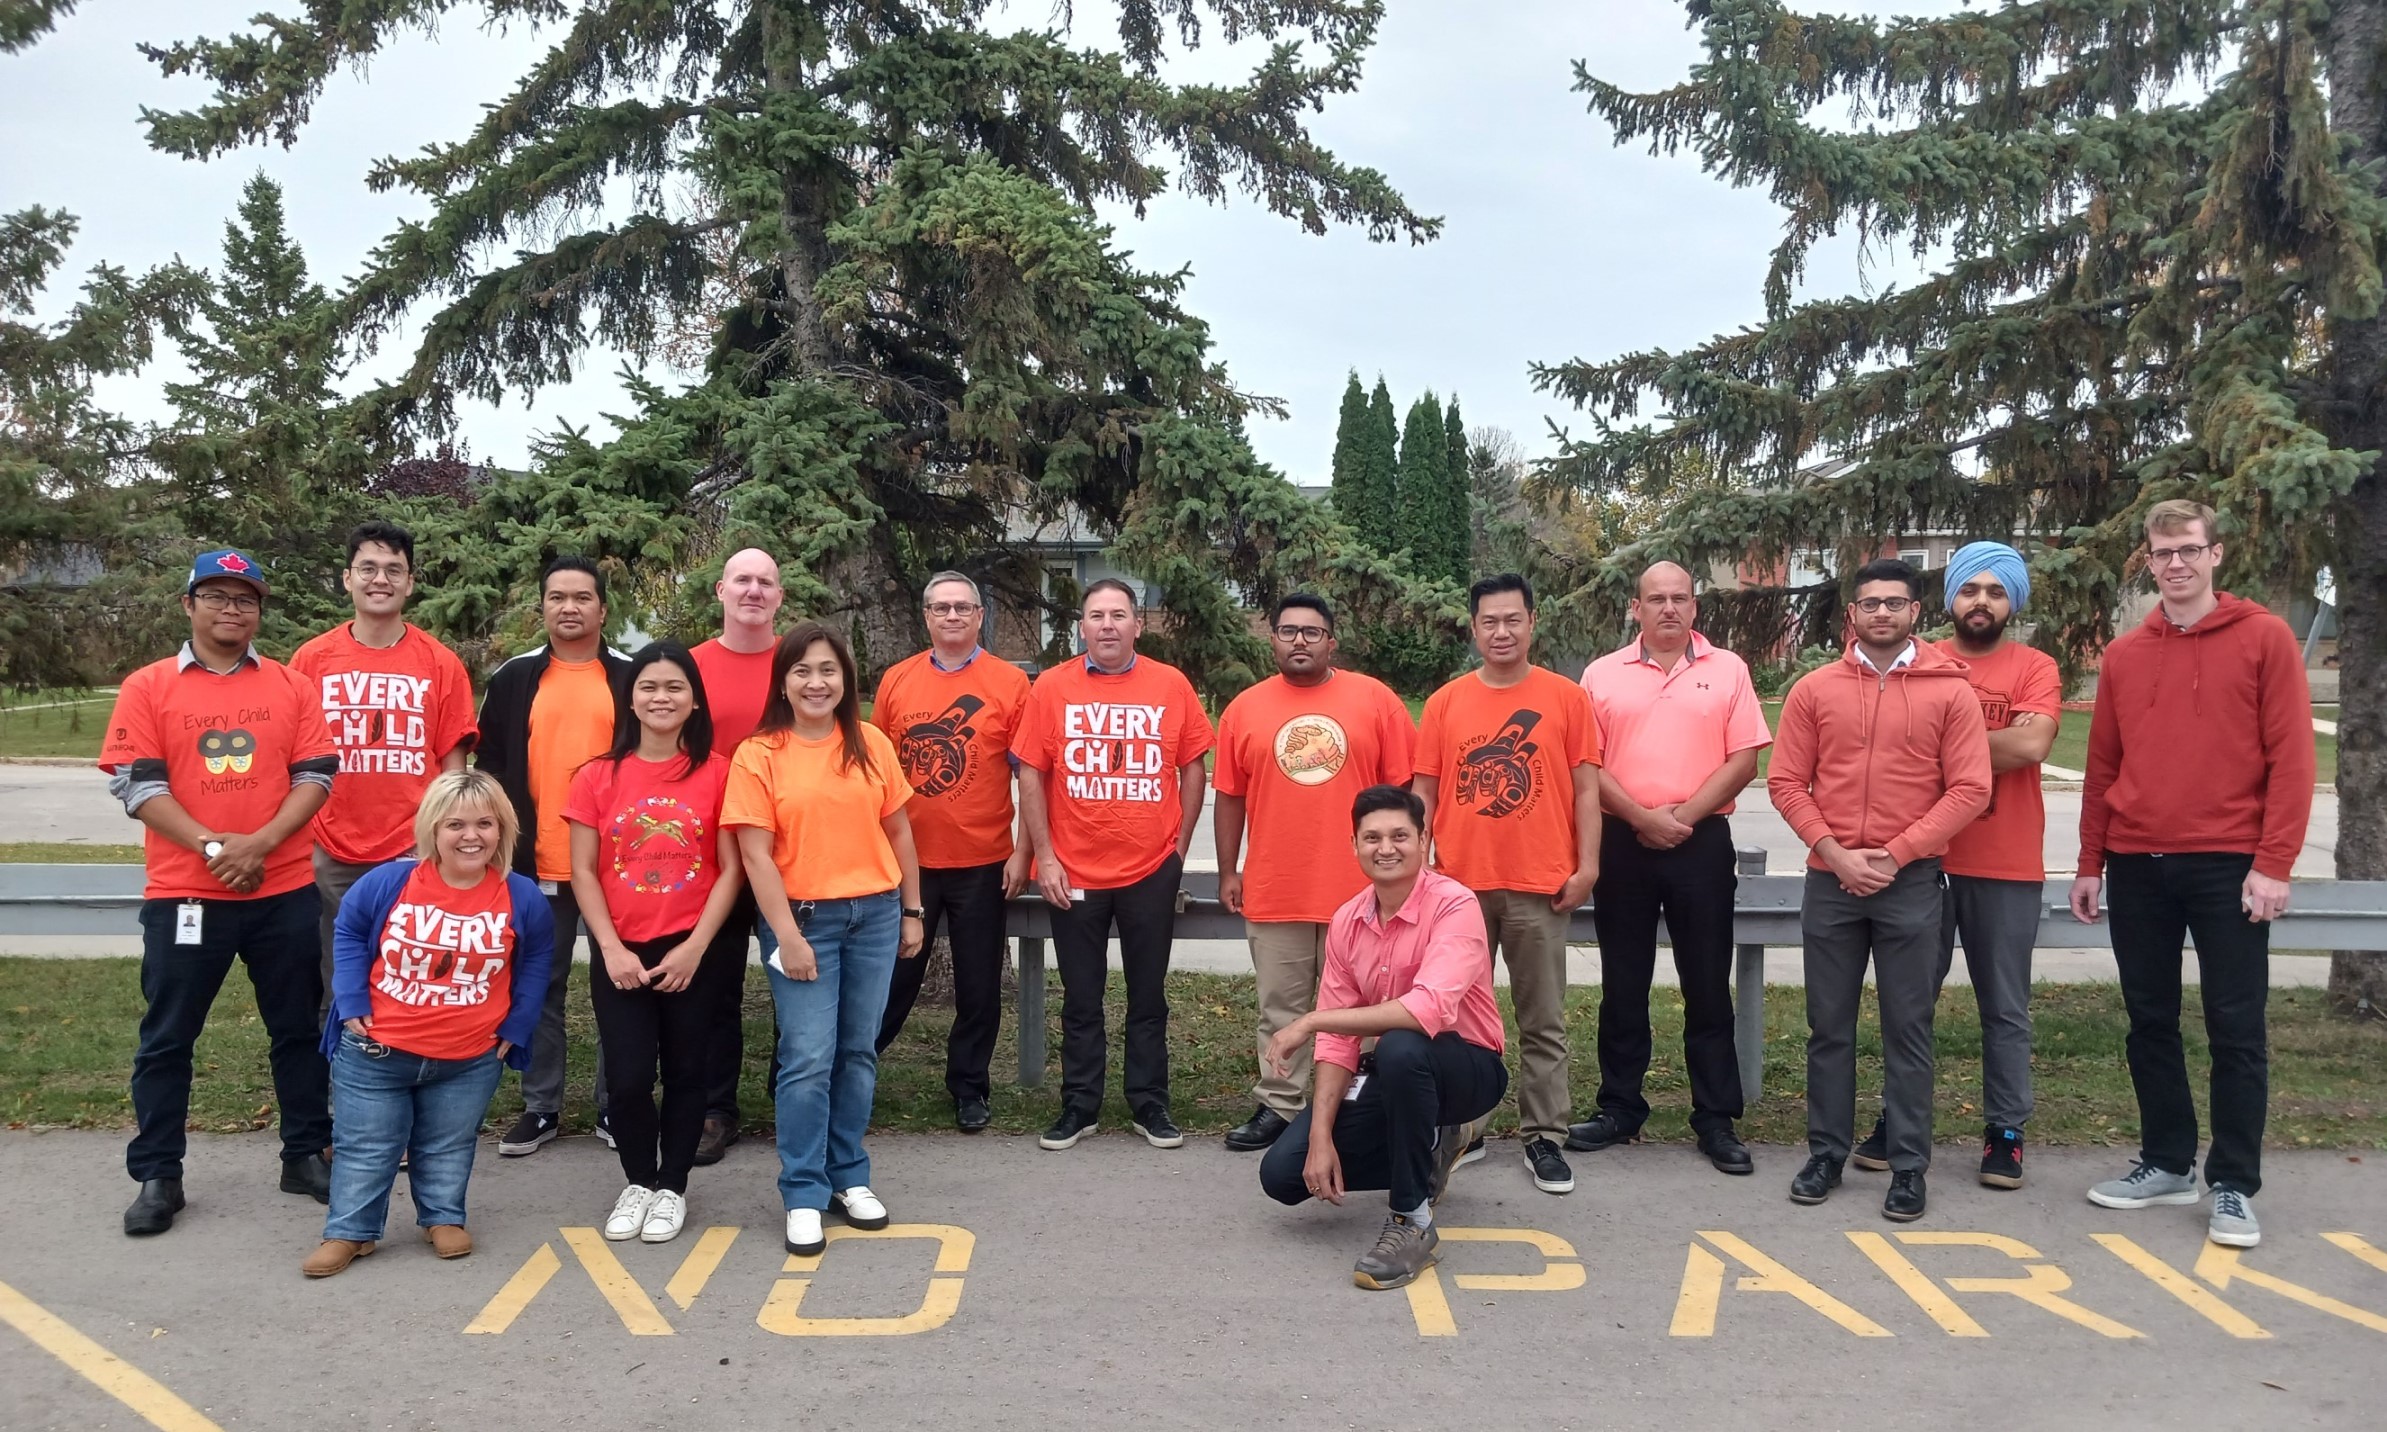 The SolutionAir team, wearing orange shirts, standing outside